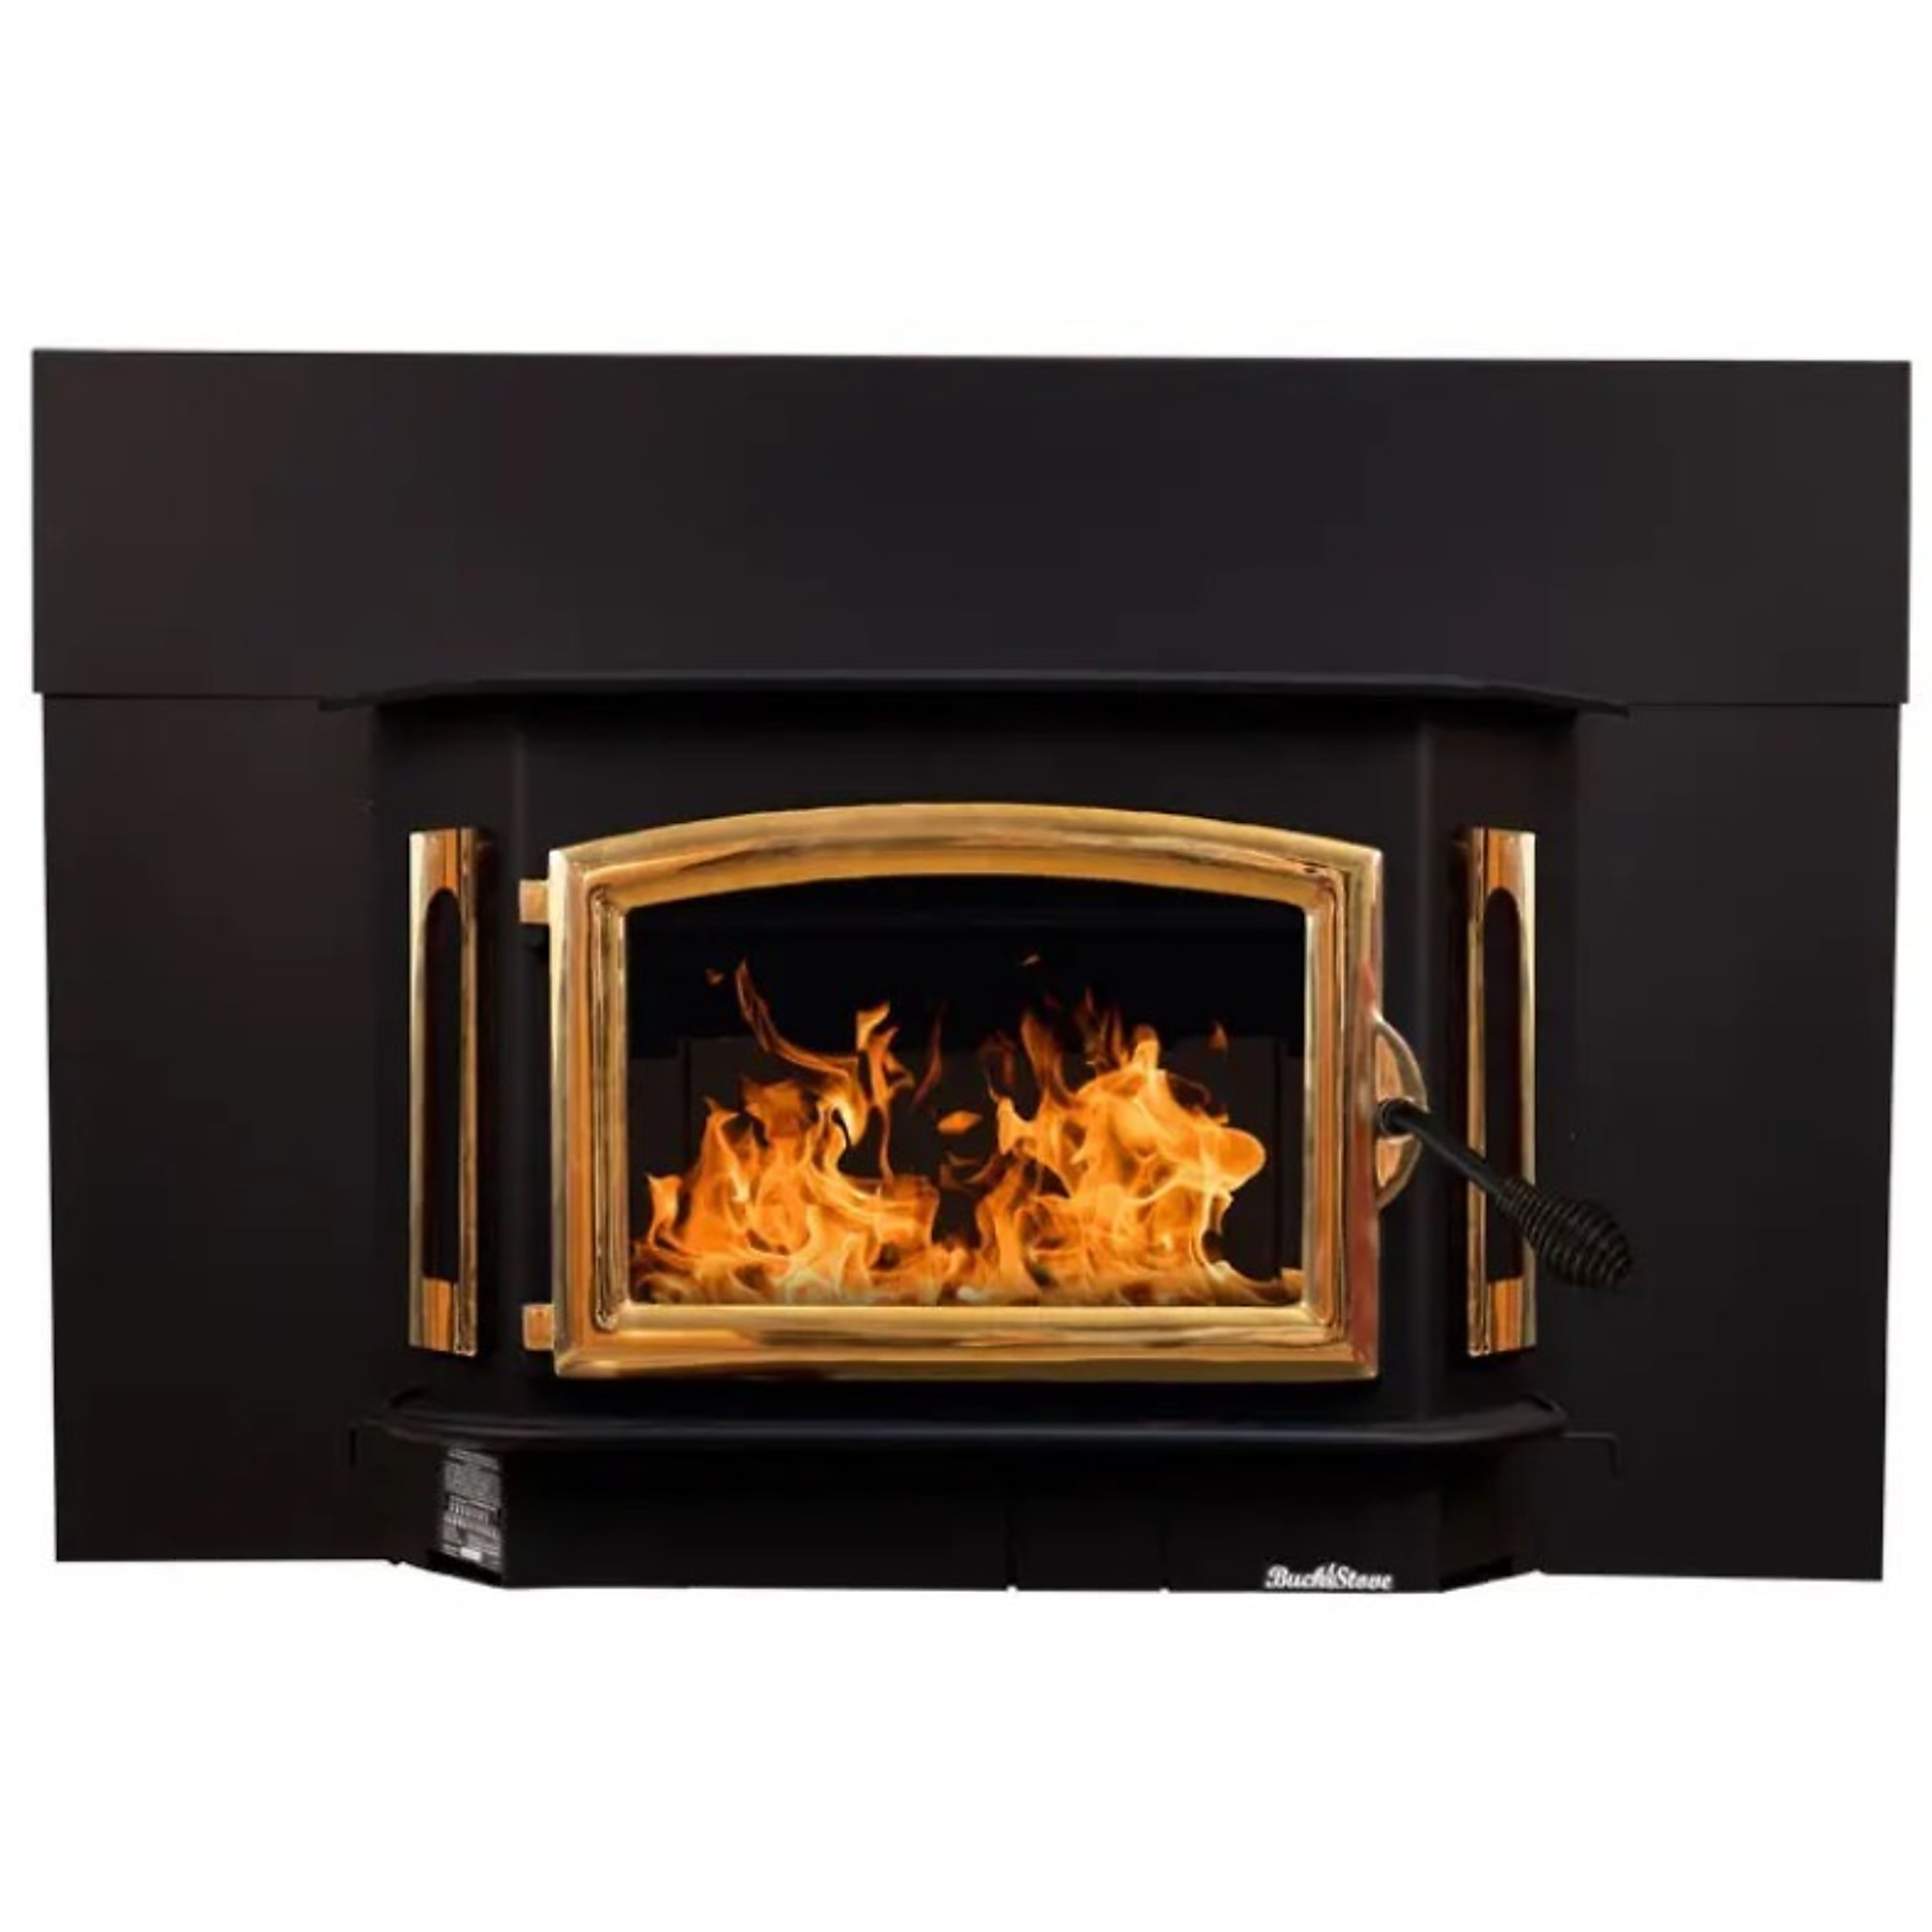 Buck, Wood Burning Insert with Gold door and Blower, Heat Output 59500 Btu/hour, Heating Capability 2700 ftÂ², Model FP 81GSI